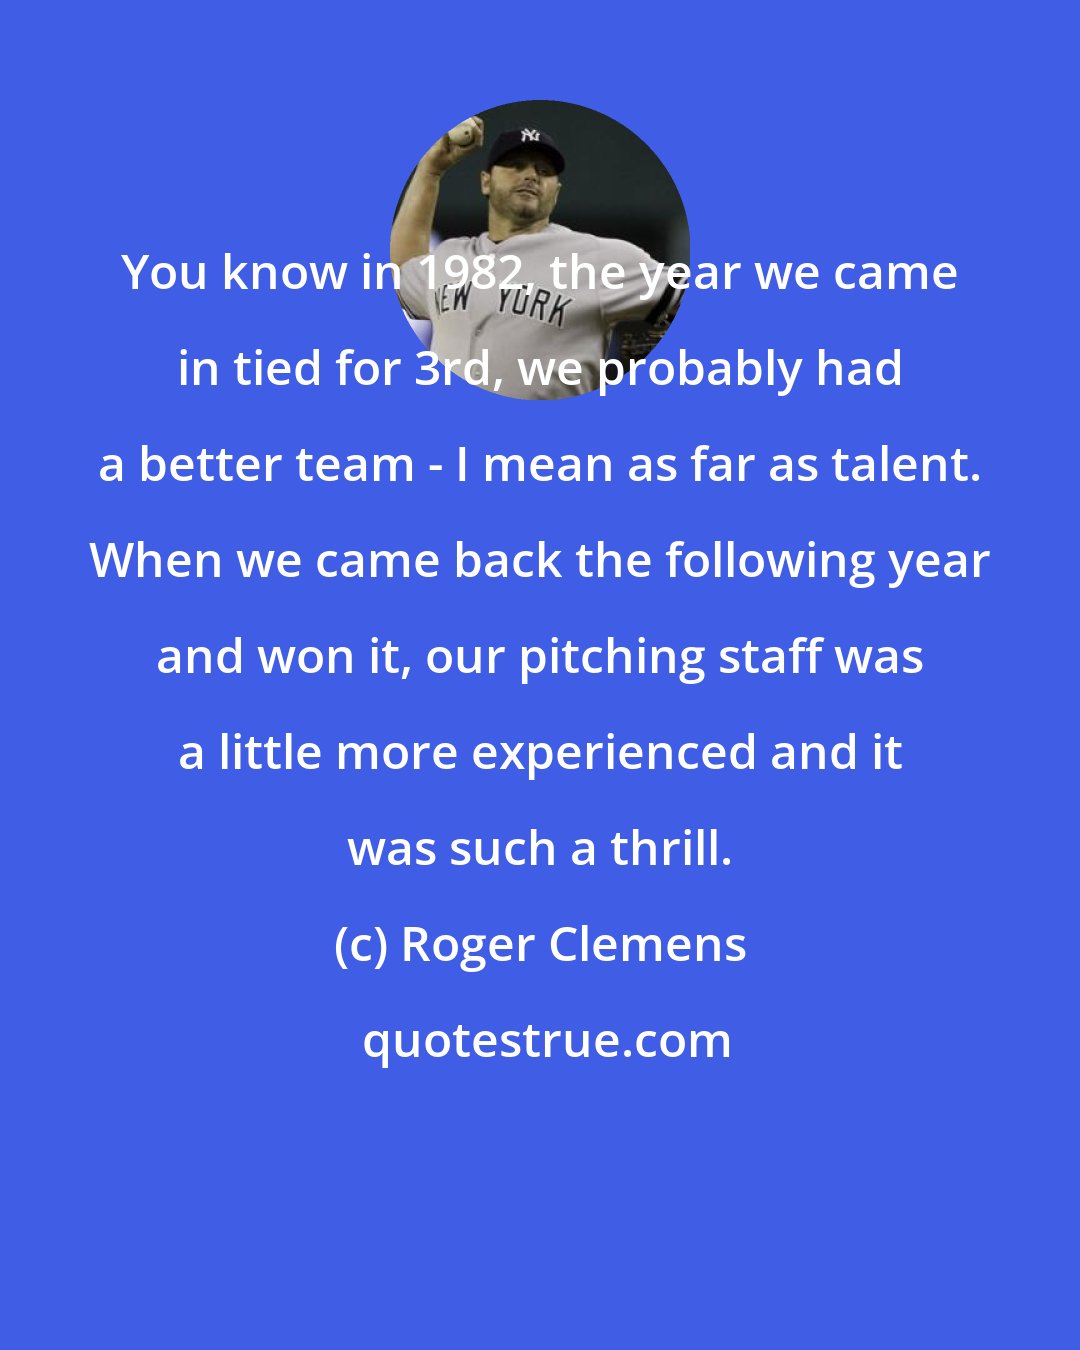 Roger Clemens: You know in 1982, the year we came in tied for 3rd, we probably had a better team - I mean as far as talent. When we came back the following year and won it, our pitching staff was a little more experienced and it was such a thrill.